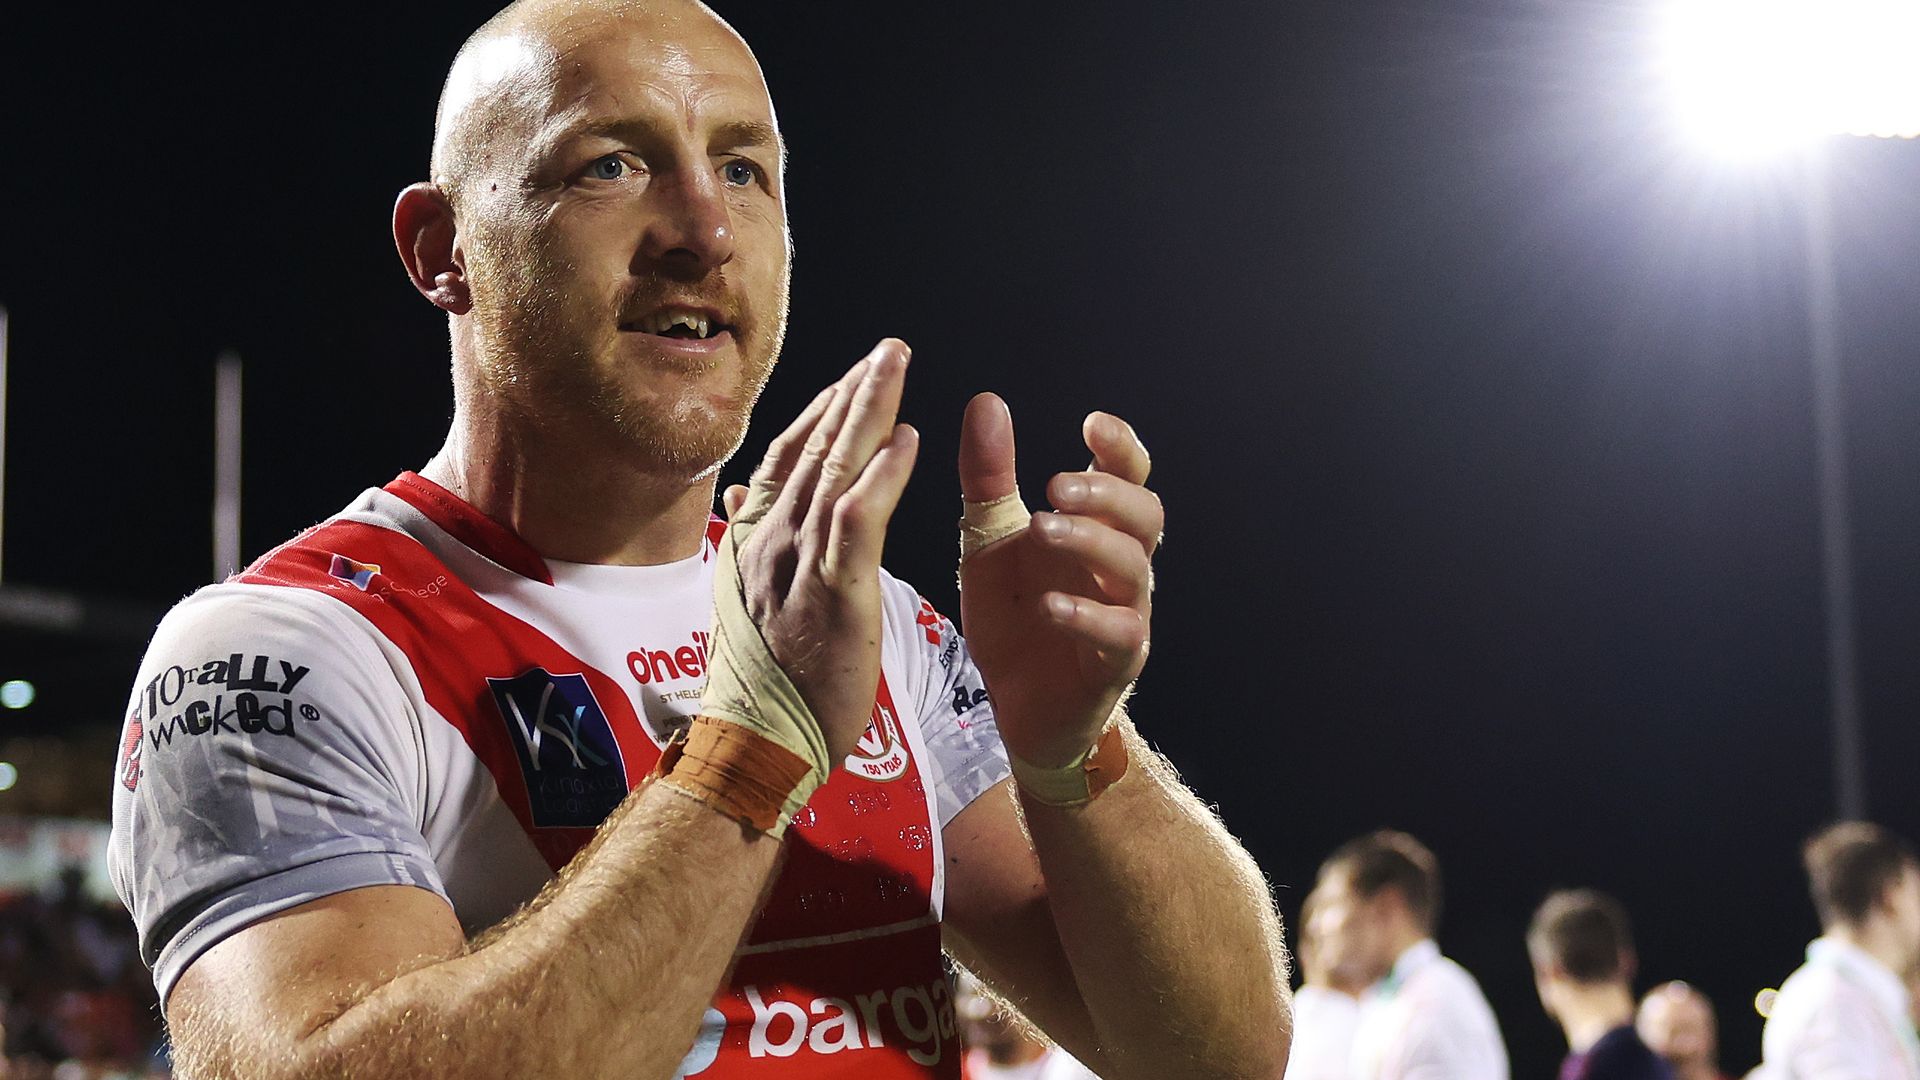 Roby: A Super League legend's last shot at Grand Final glory